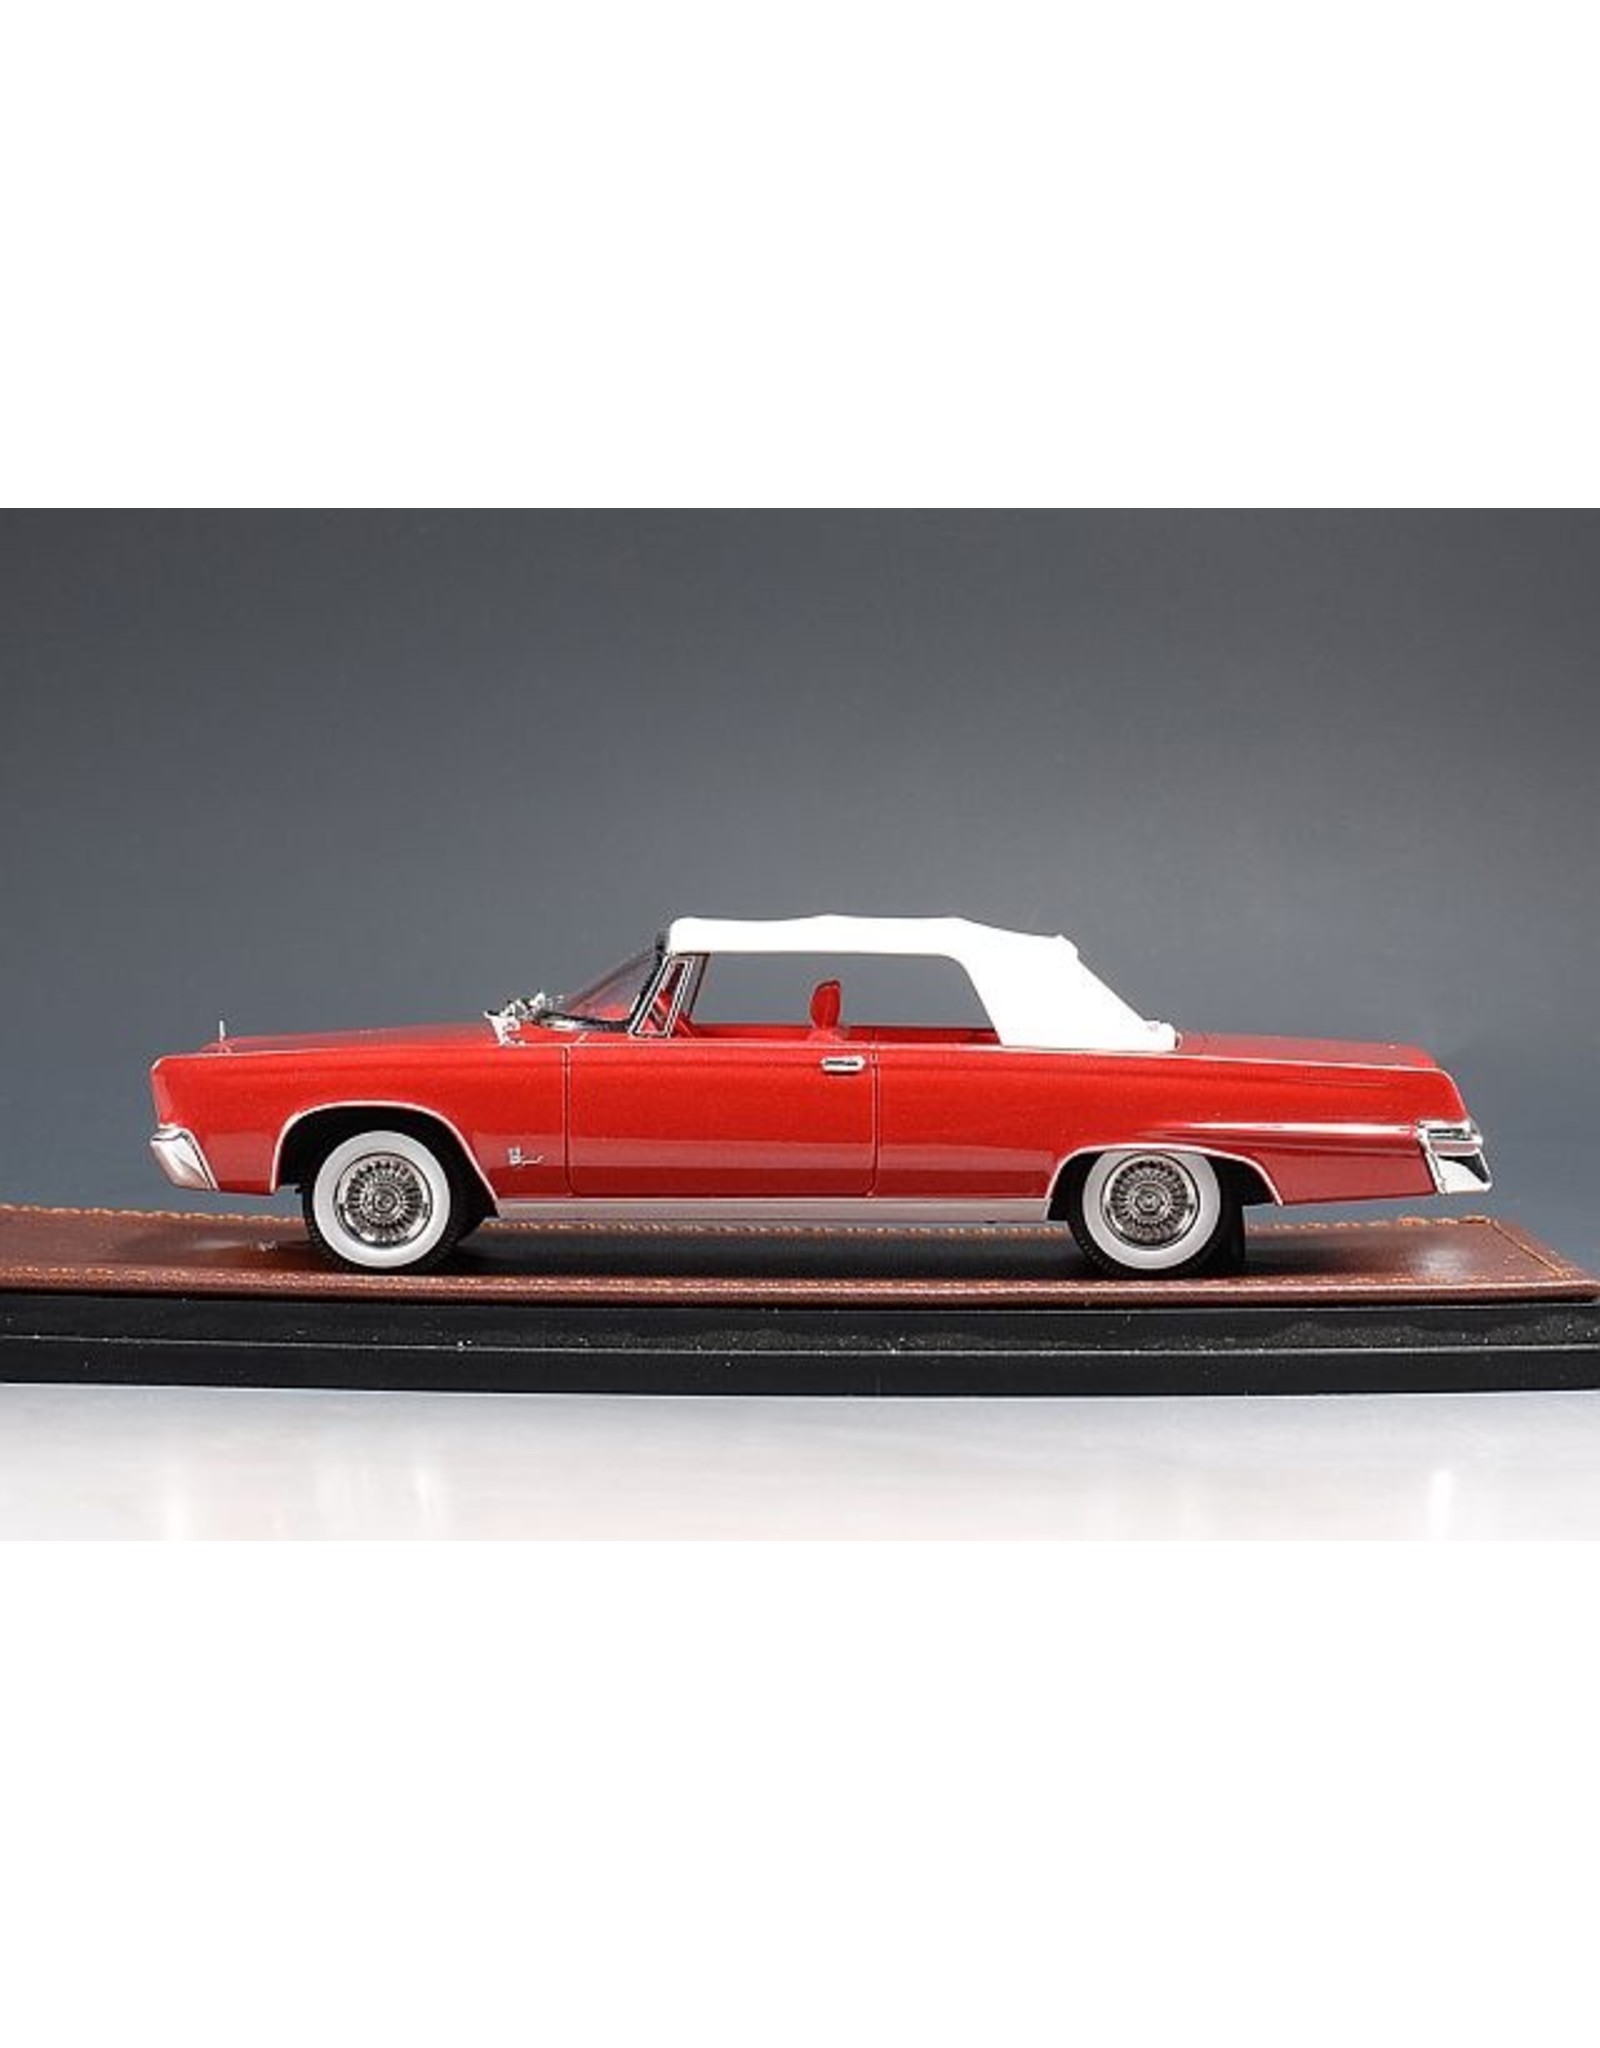 Imperial(Chrysler) Imperial Crown Convertible(1964)closed roof(red).